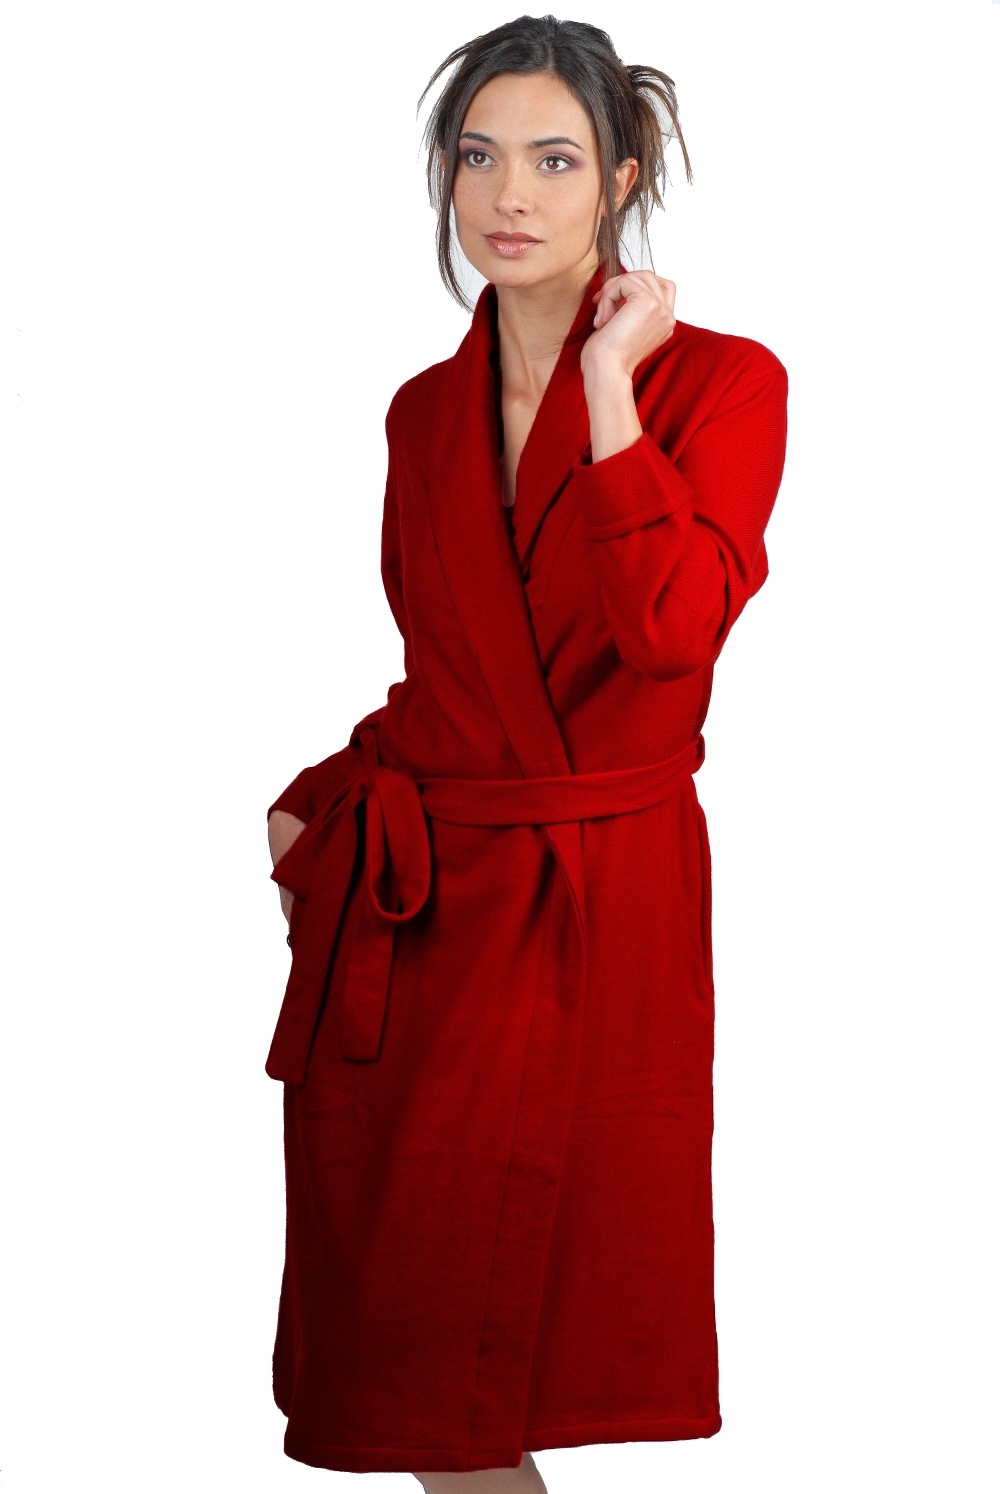 Cashmere accessori cocooning mylady rosso intenso t3